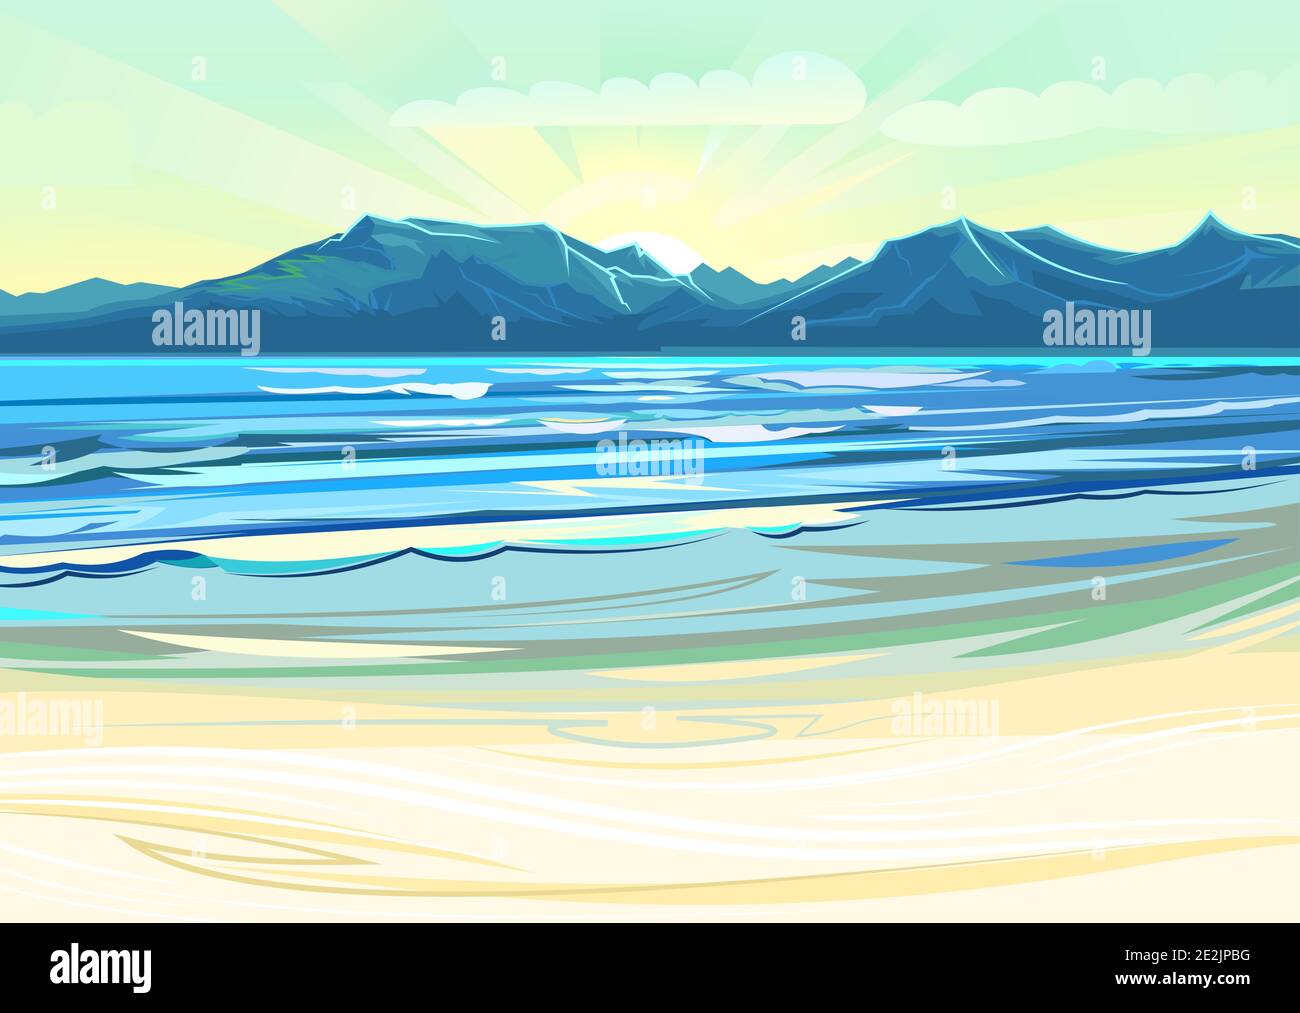 Seaside. Surf line. Sea and waves. On the horizon there is a rocky shore. Flat style illustration. Sand beach. Vector Stock Vector